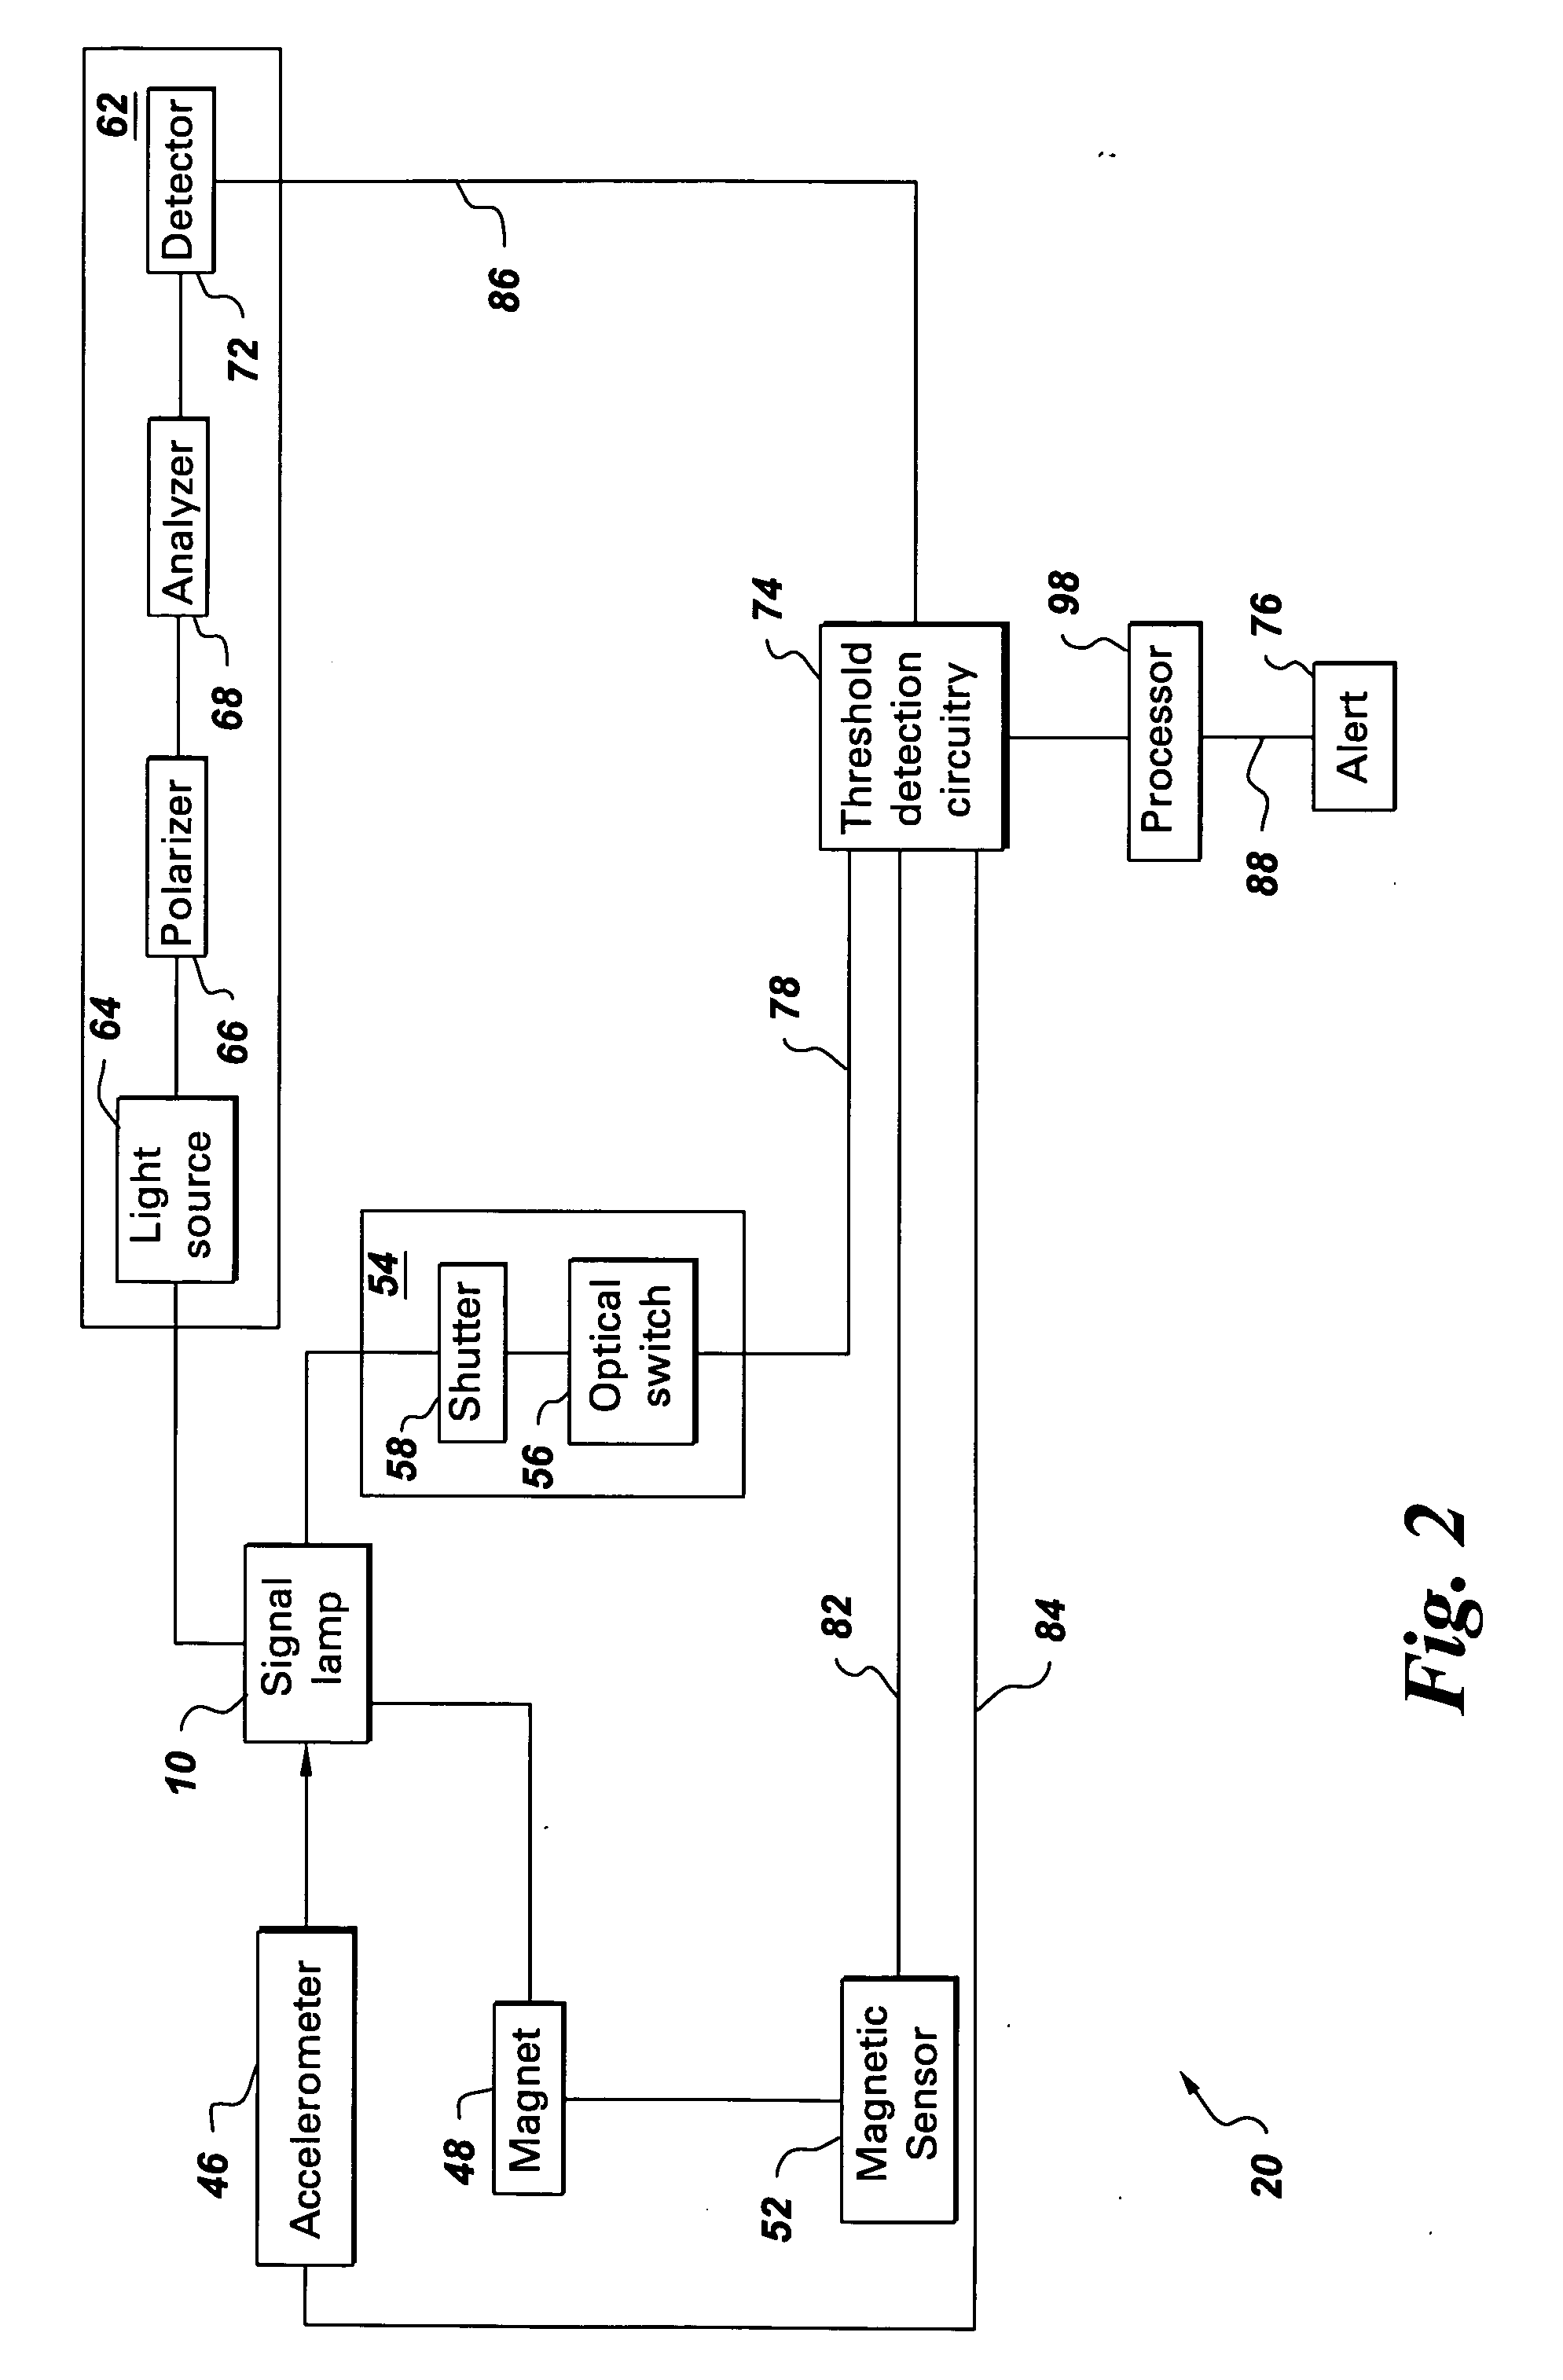 System and method for monitoring alignment of a signal lamp